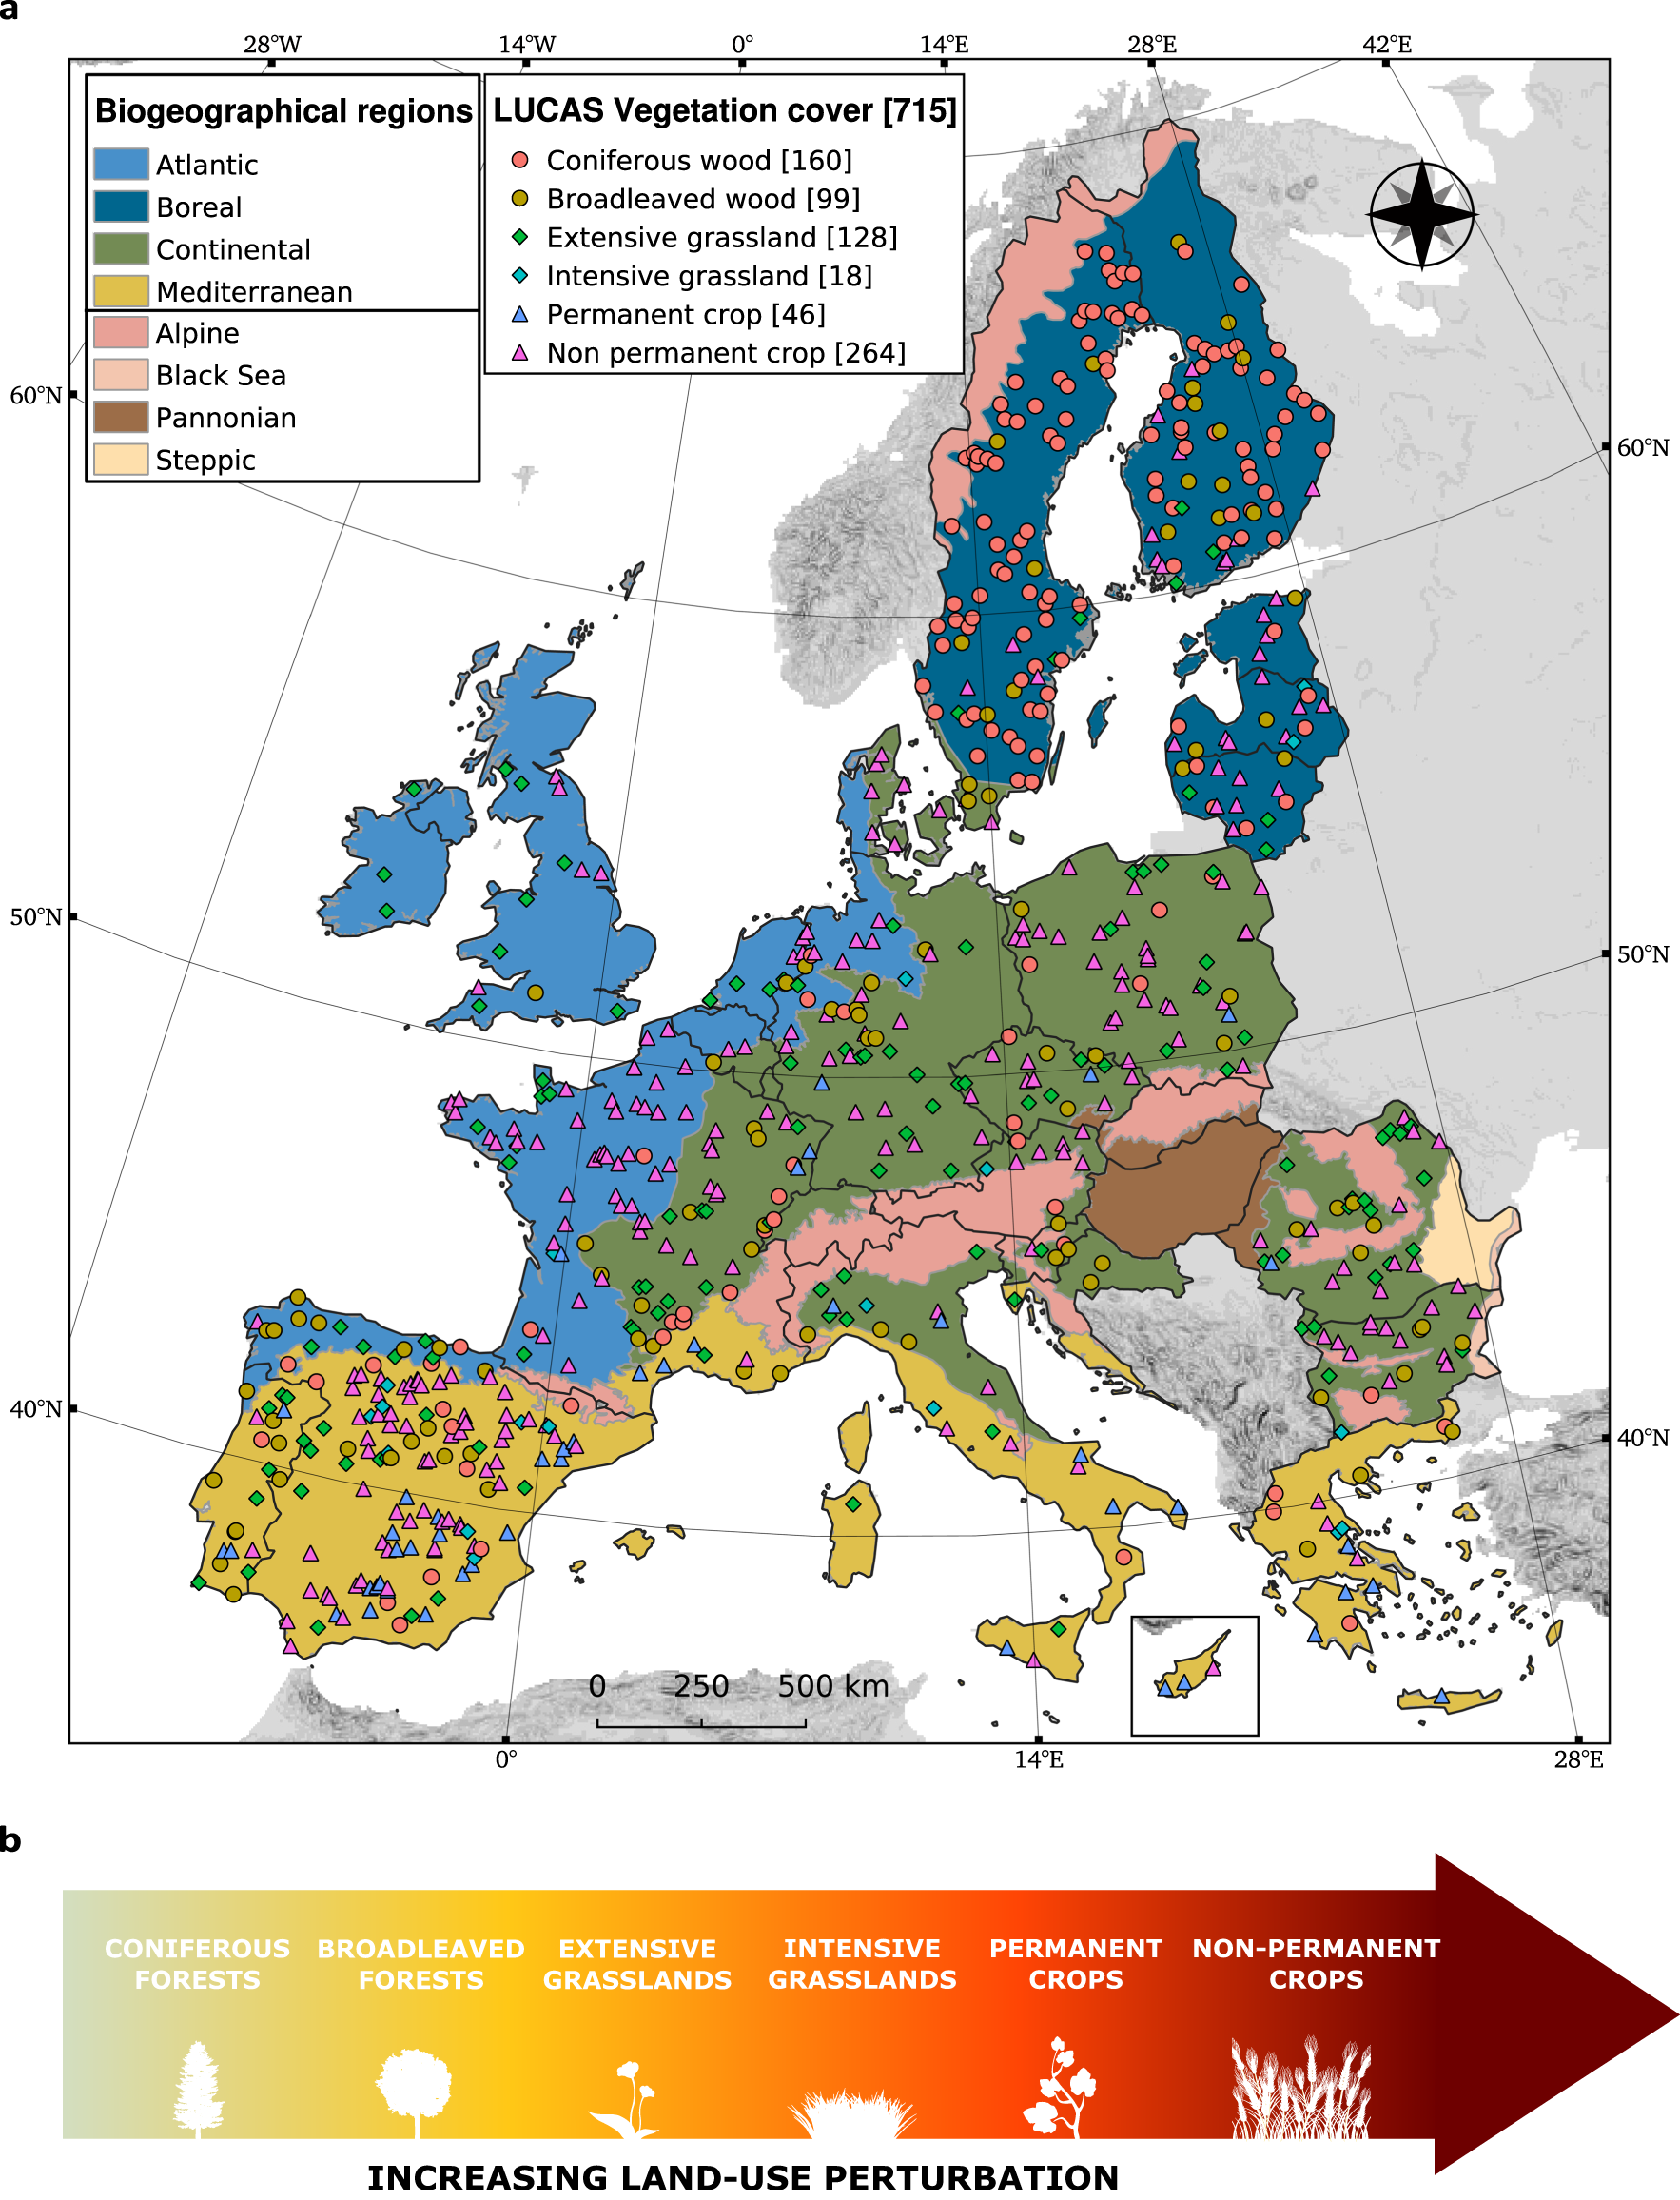 Patterns in soil microbial diversity across Europe | Nature Communications